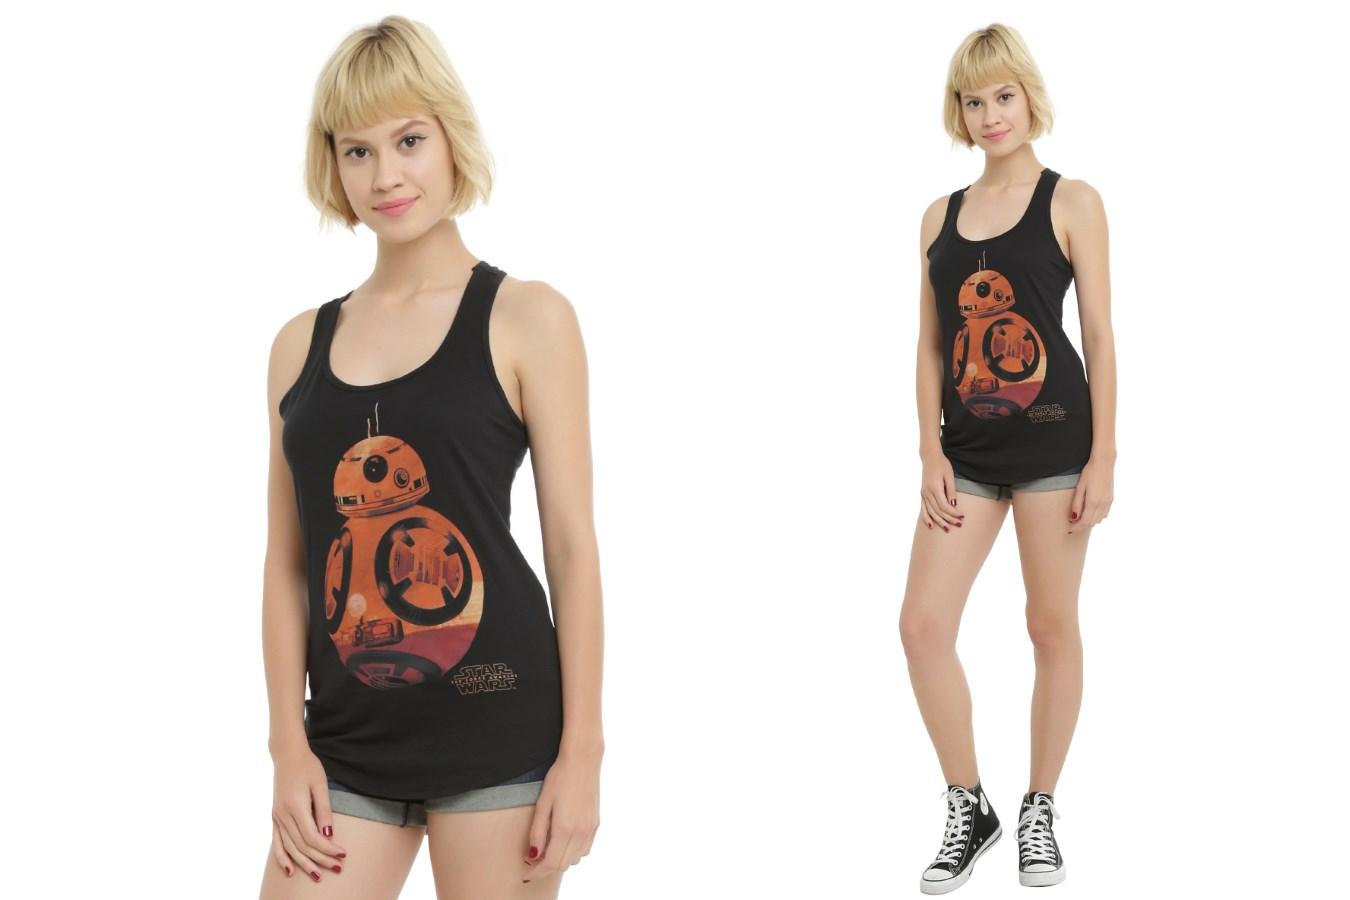 BB-8 silhouette tank top at Hot Topic